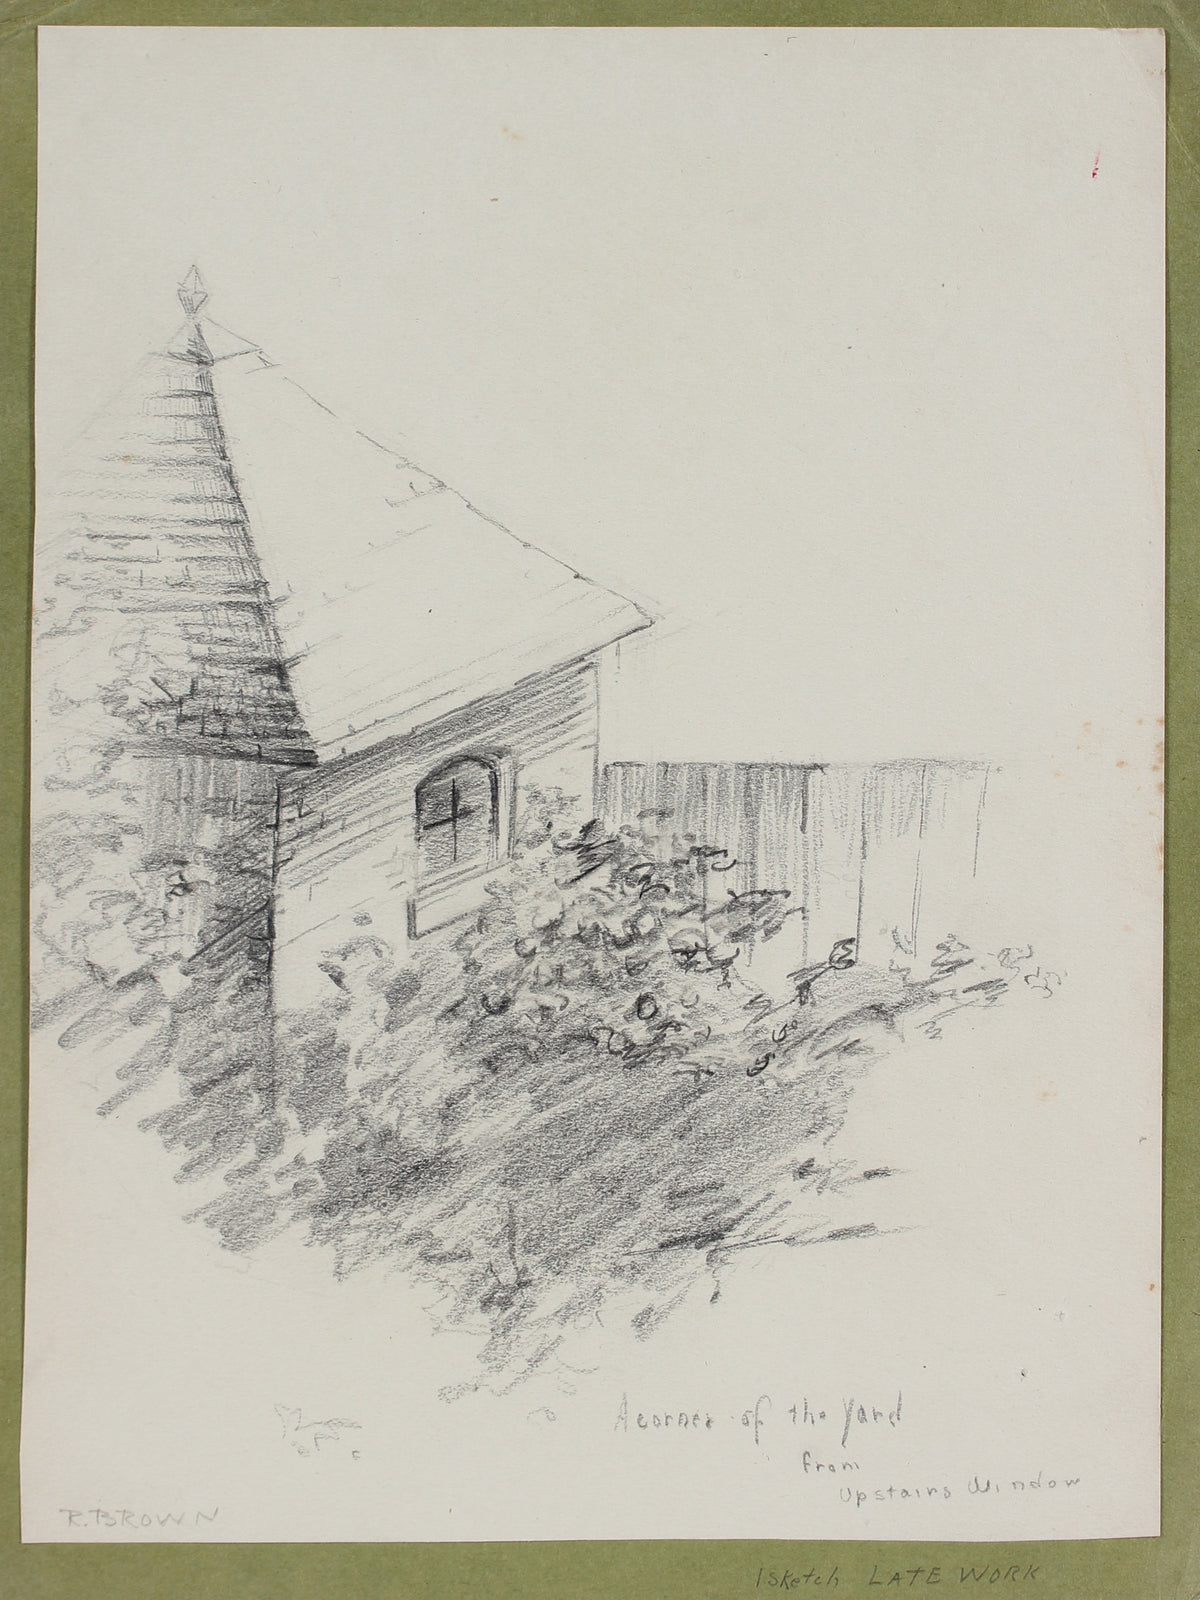 &lt;I&gt;A Corner of the Yard From Upstairs Window&lt;/I&gt; &lt;br&gt;20th Century Graphite&lt;br&gt;&lt;br&gt;#A4095